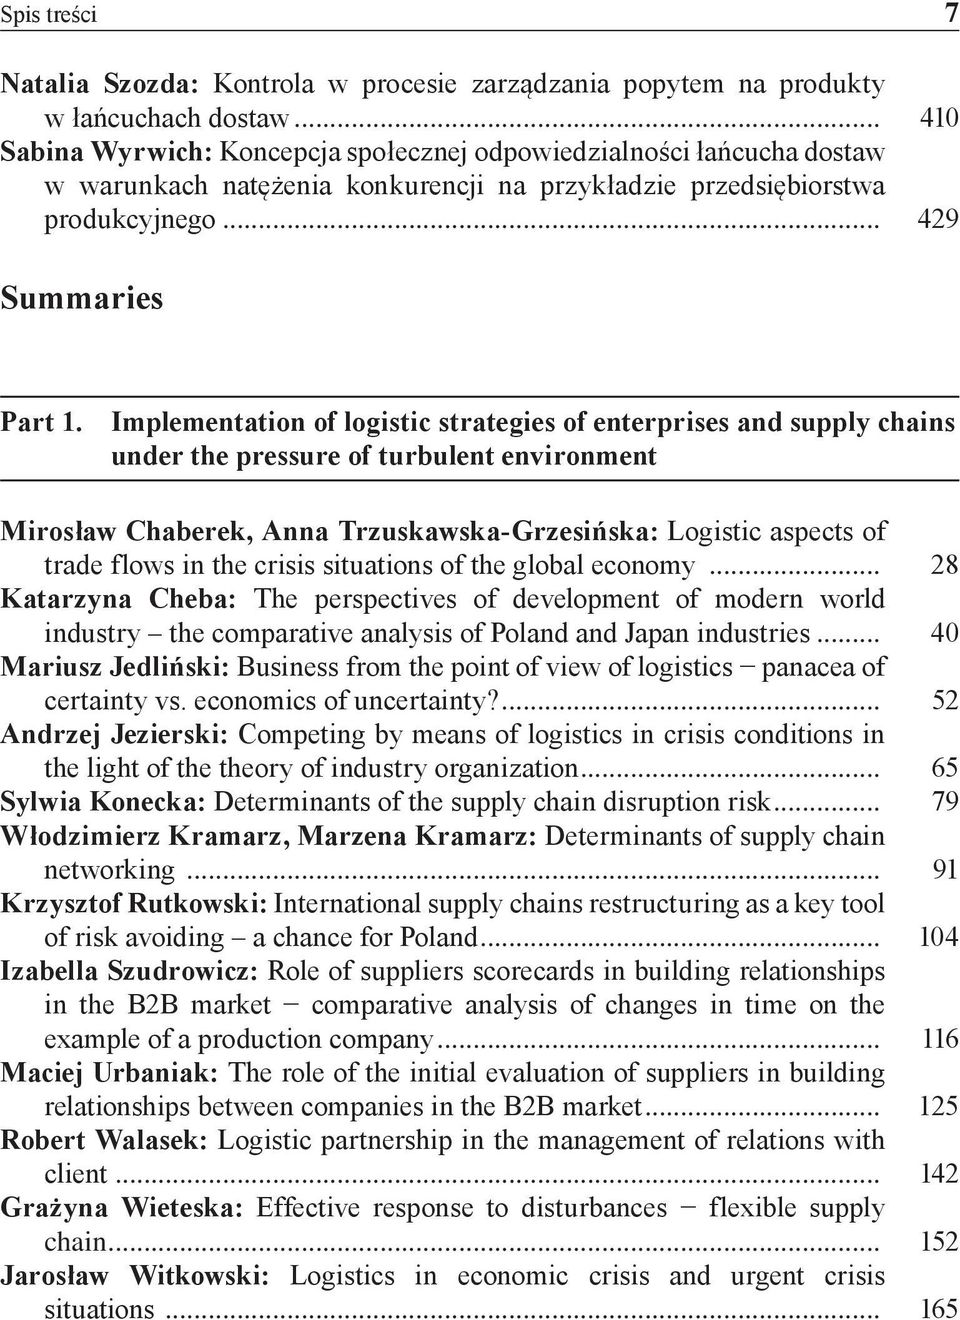 Implementation of logistic strategies of enterprises and supply chains under the pressure of turbulent environment Mirosław Chaberek, Anna Trzuskawska-Grzesińska: Logistic aspects of trade flows in